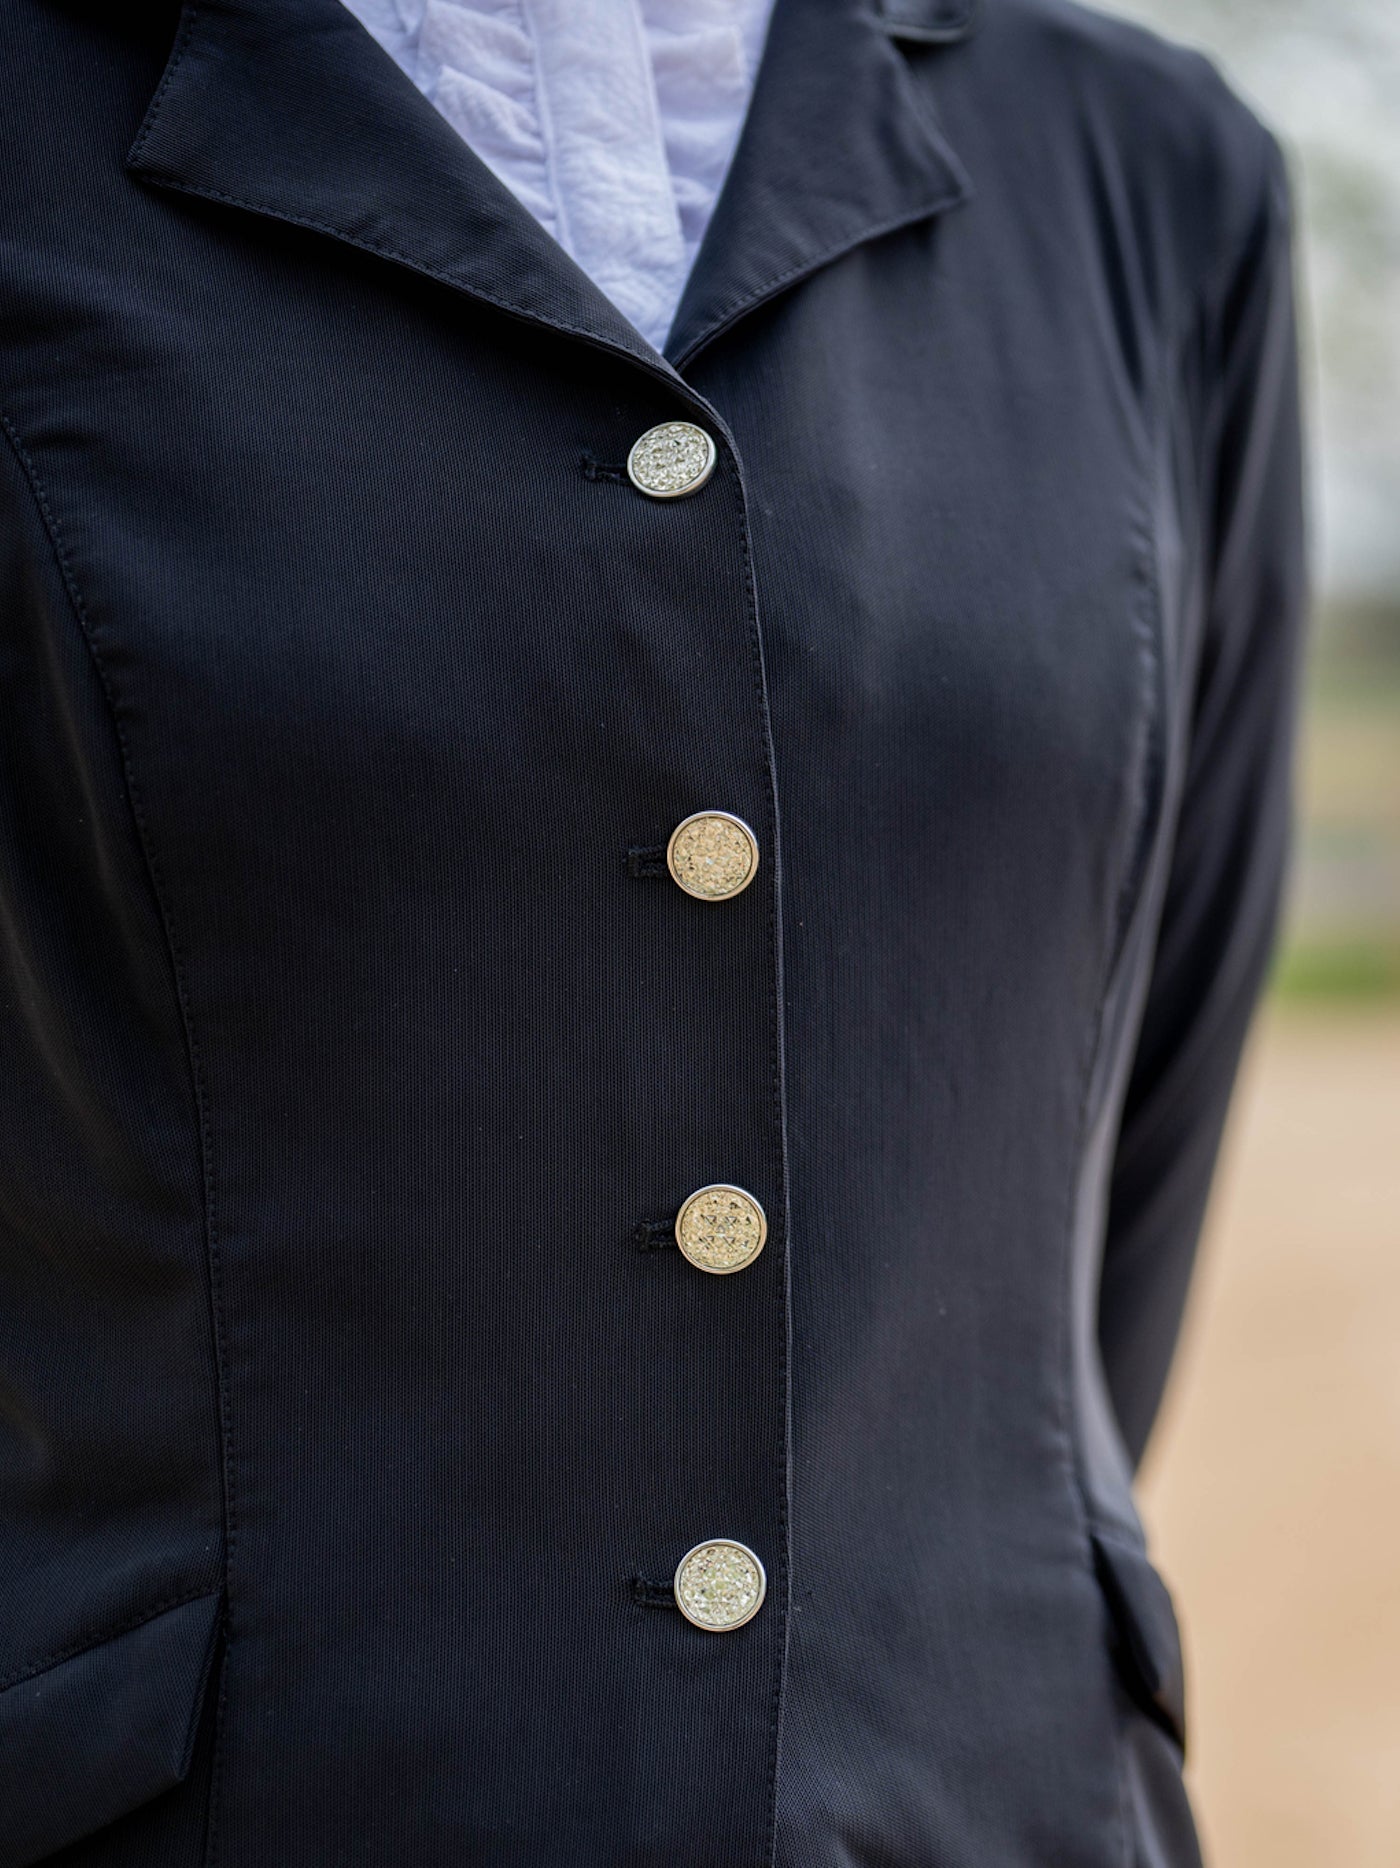 FITS Zephyr Dressage Show Coat, Rhinestone Buttons - Equiluxe Tack